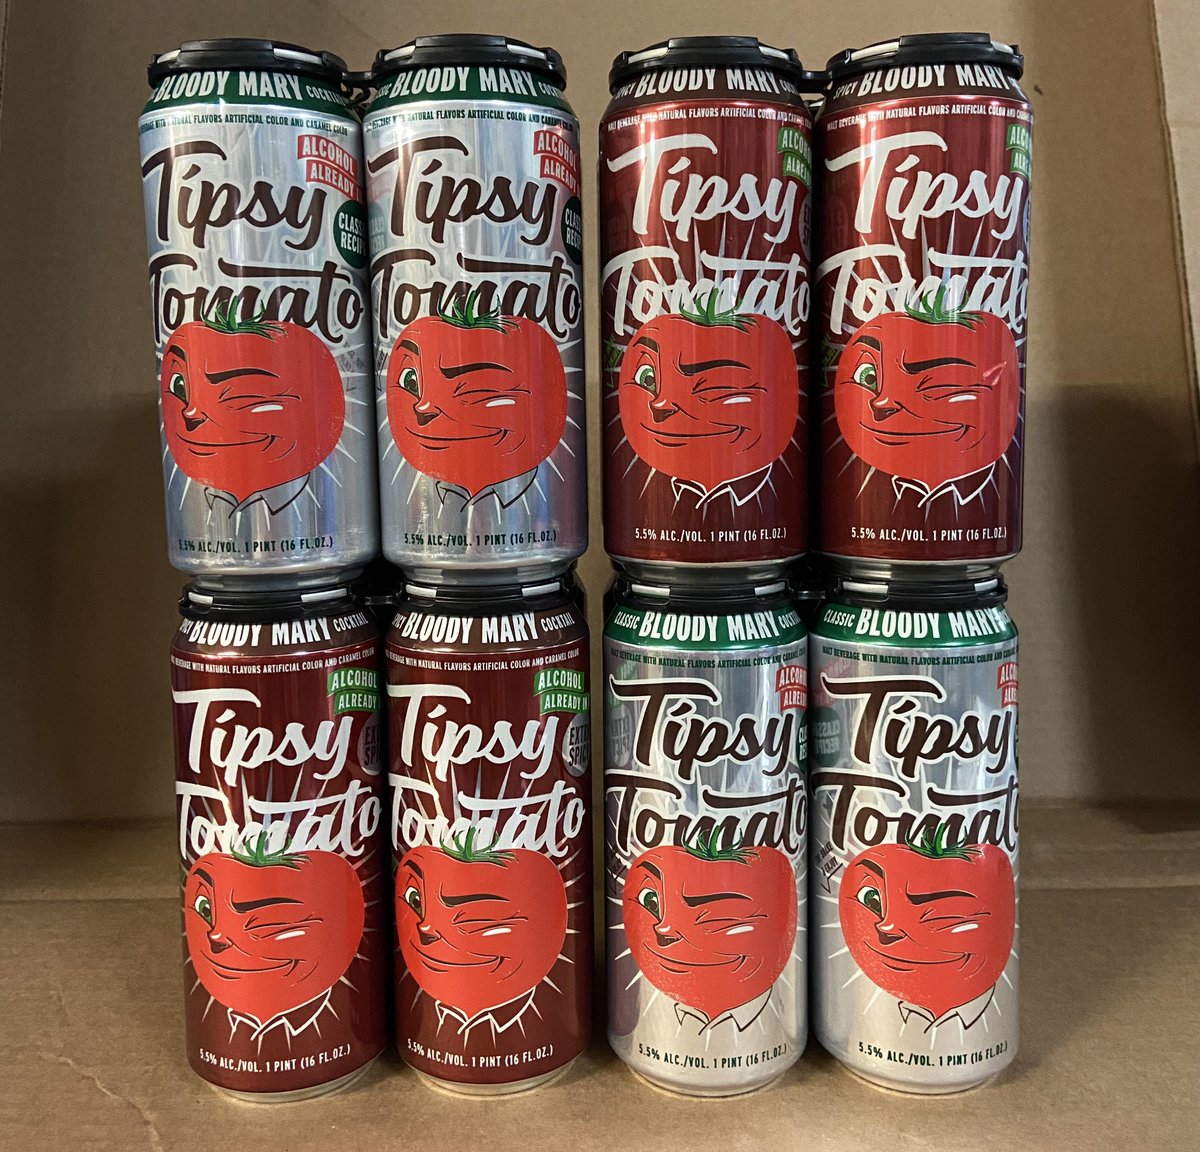 Tipsy Tomato is back in stock! A classic Bloody Mary in a can- Classic Recipe or Extra Spicy🍅🍅